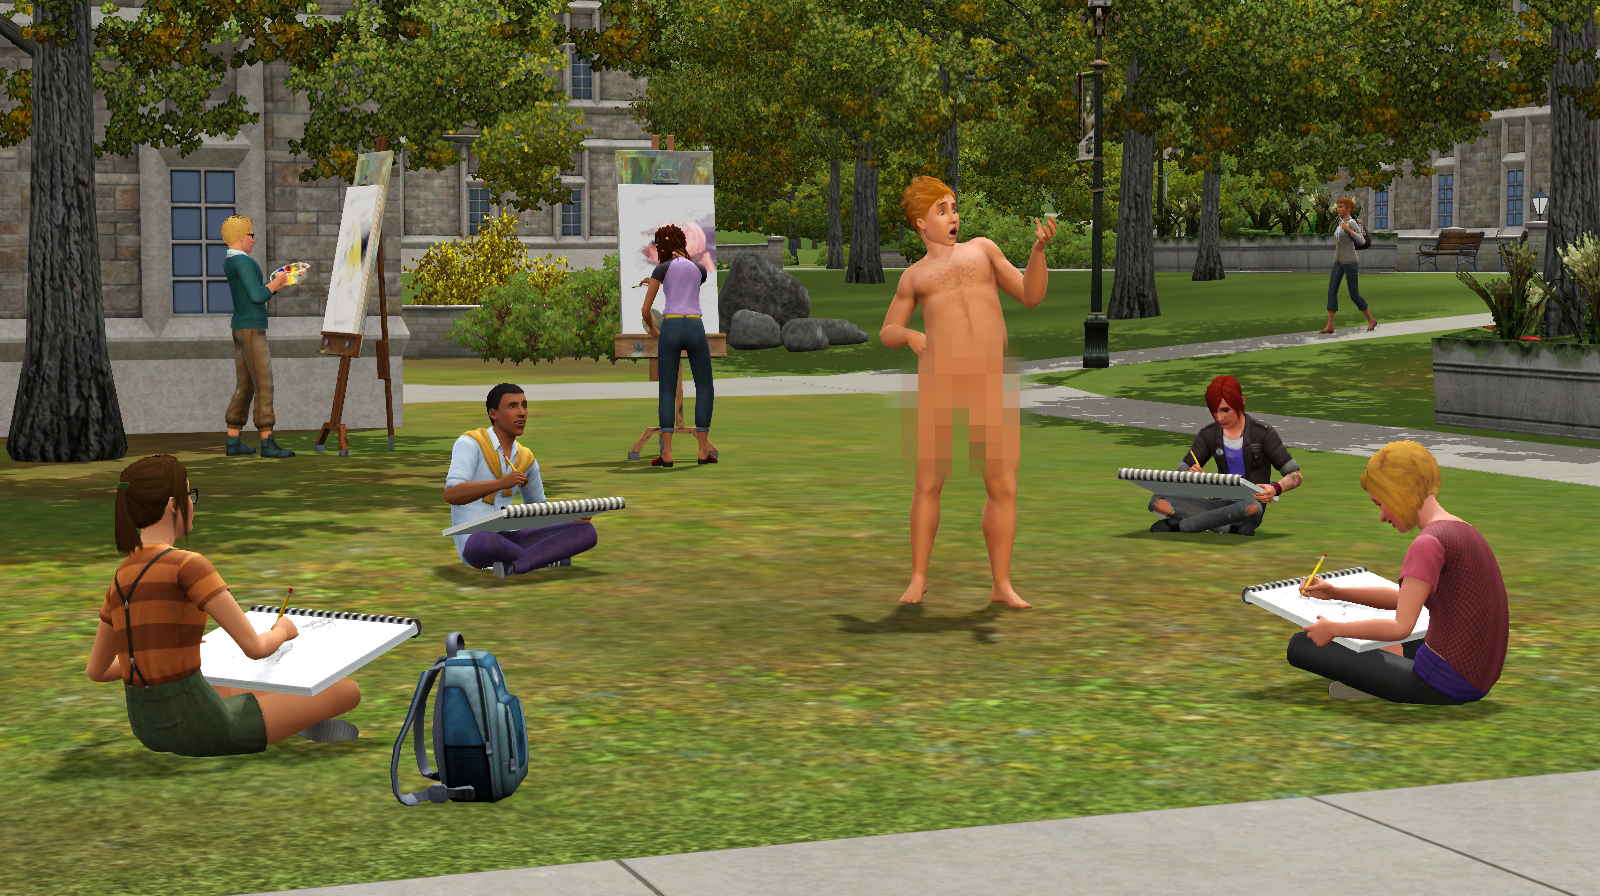 Sims 3 University Release Date New Zealand